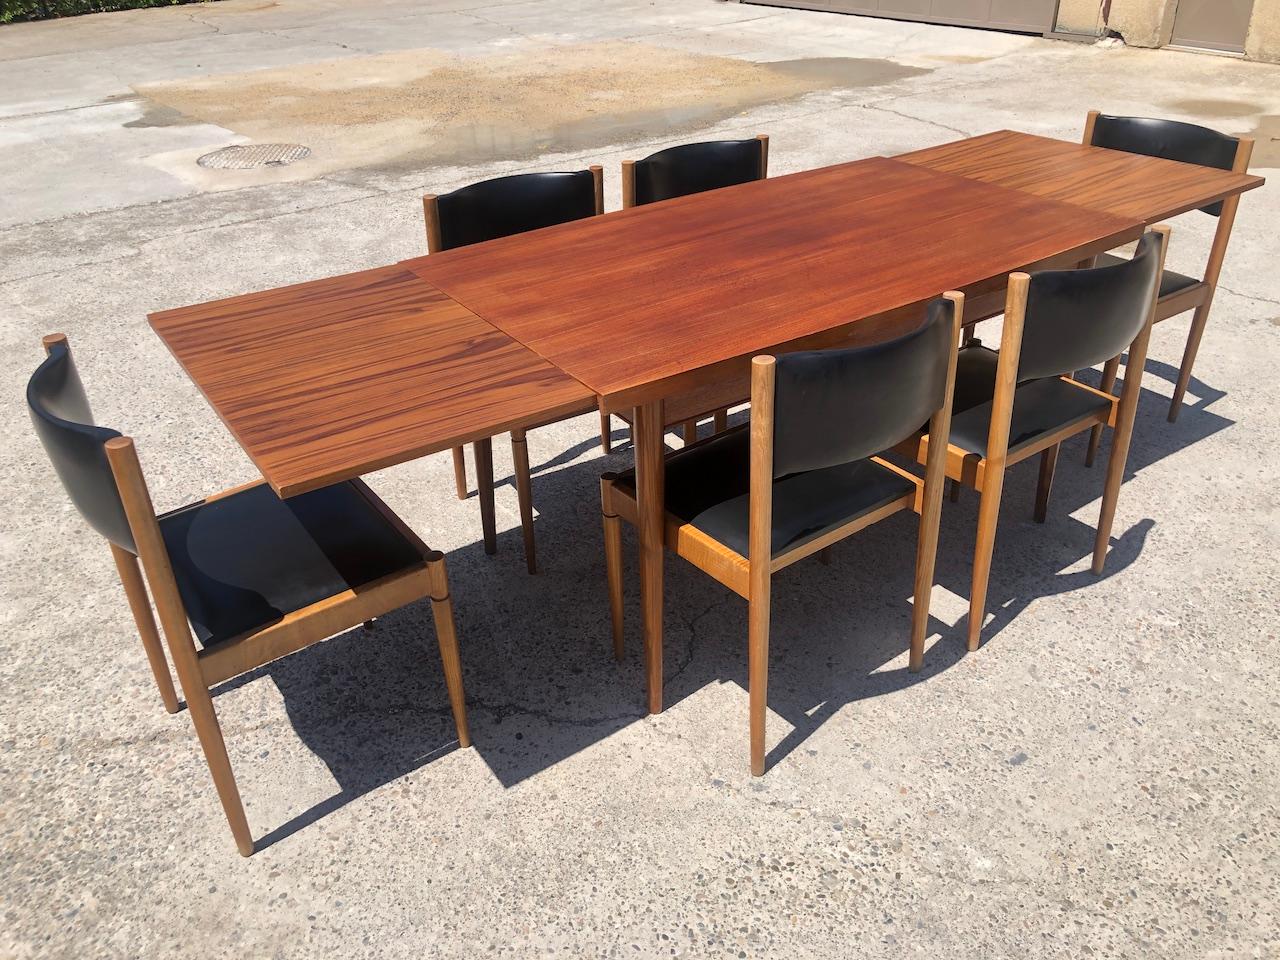 Set of extendable table and 6 Scandinavian chairs in teak and black leatherette 1965.
Closed table dimensions: 140 cm x 72 x 80 cm
Open table dimensions 240 cm x 72 x 80 cm
Chair dimensions: Height 81 x Width 50 x Depth 40 cm
Good condition